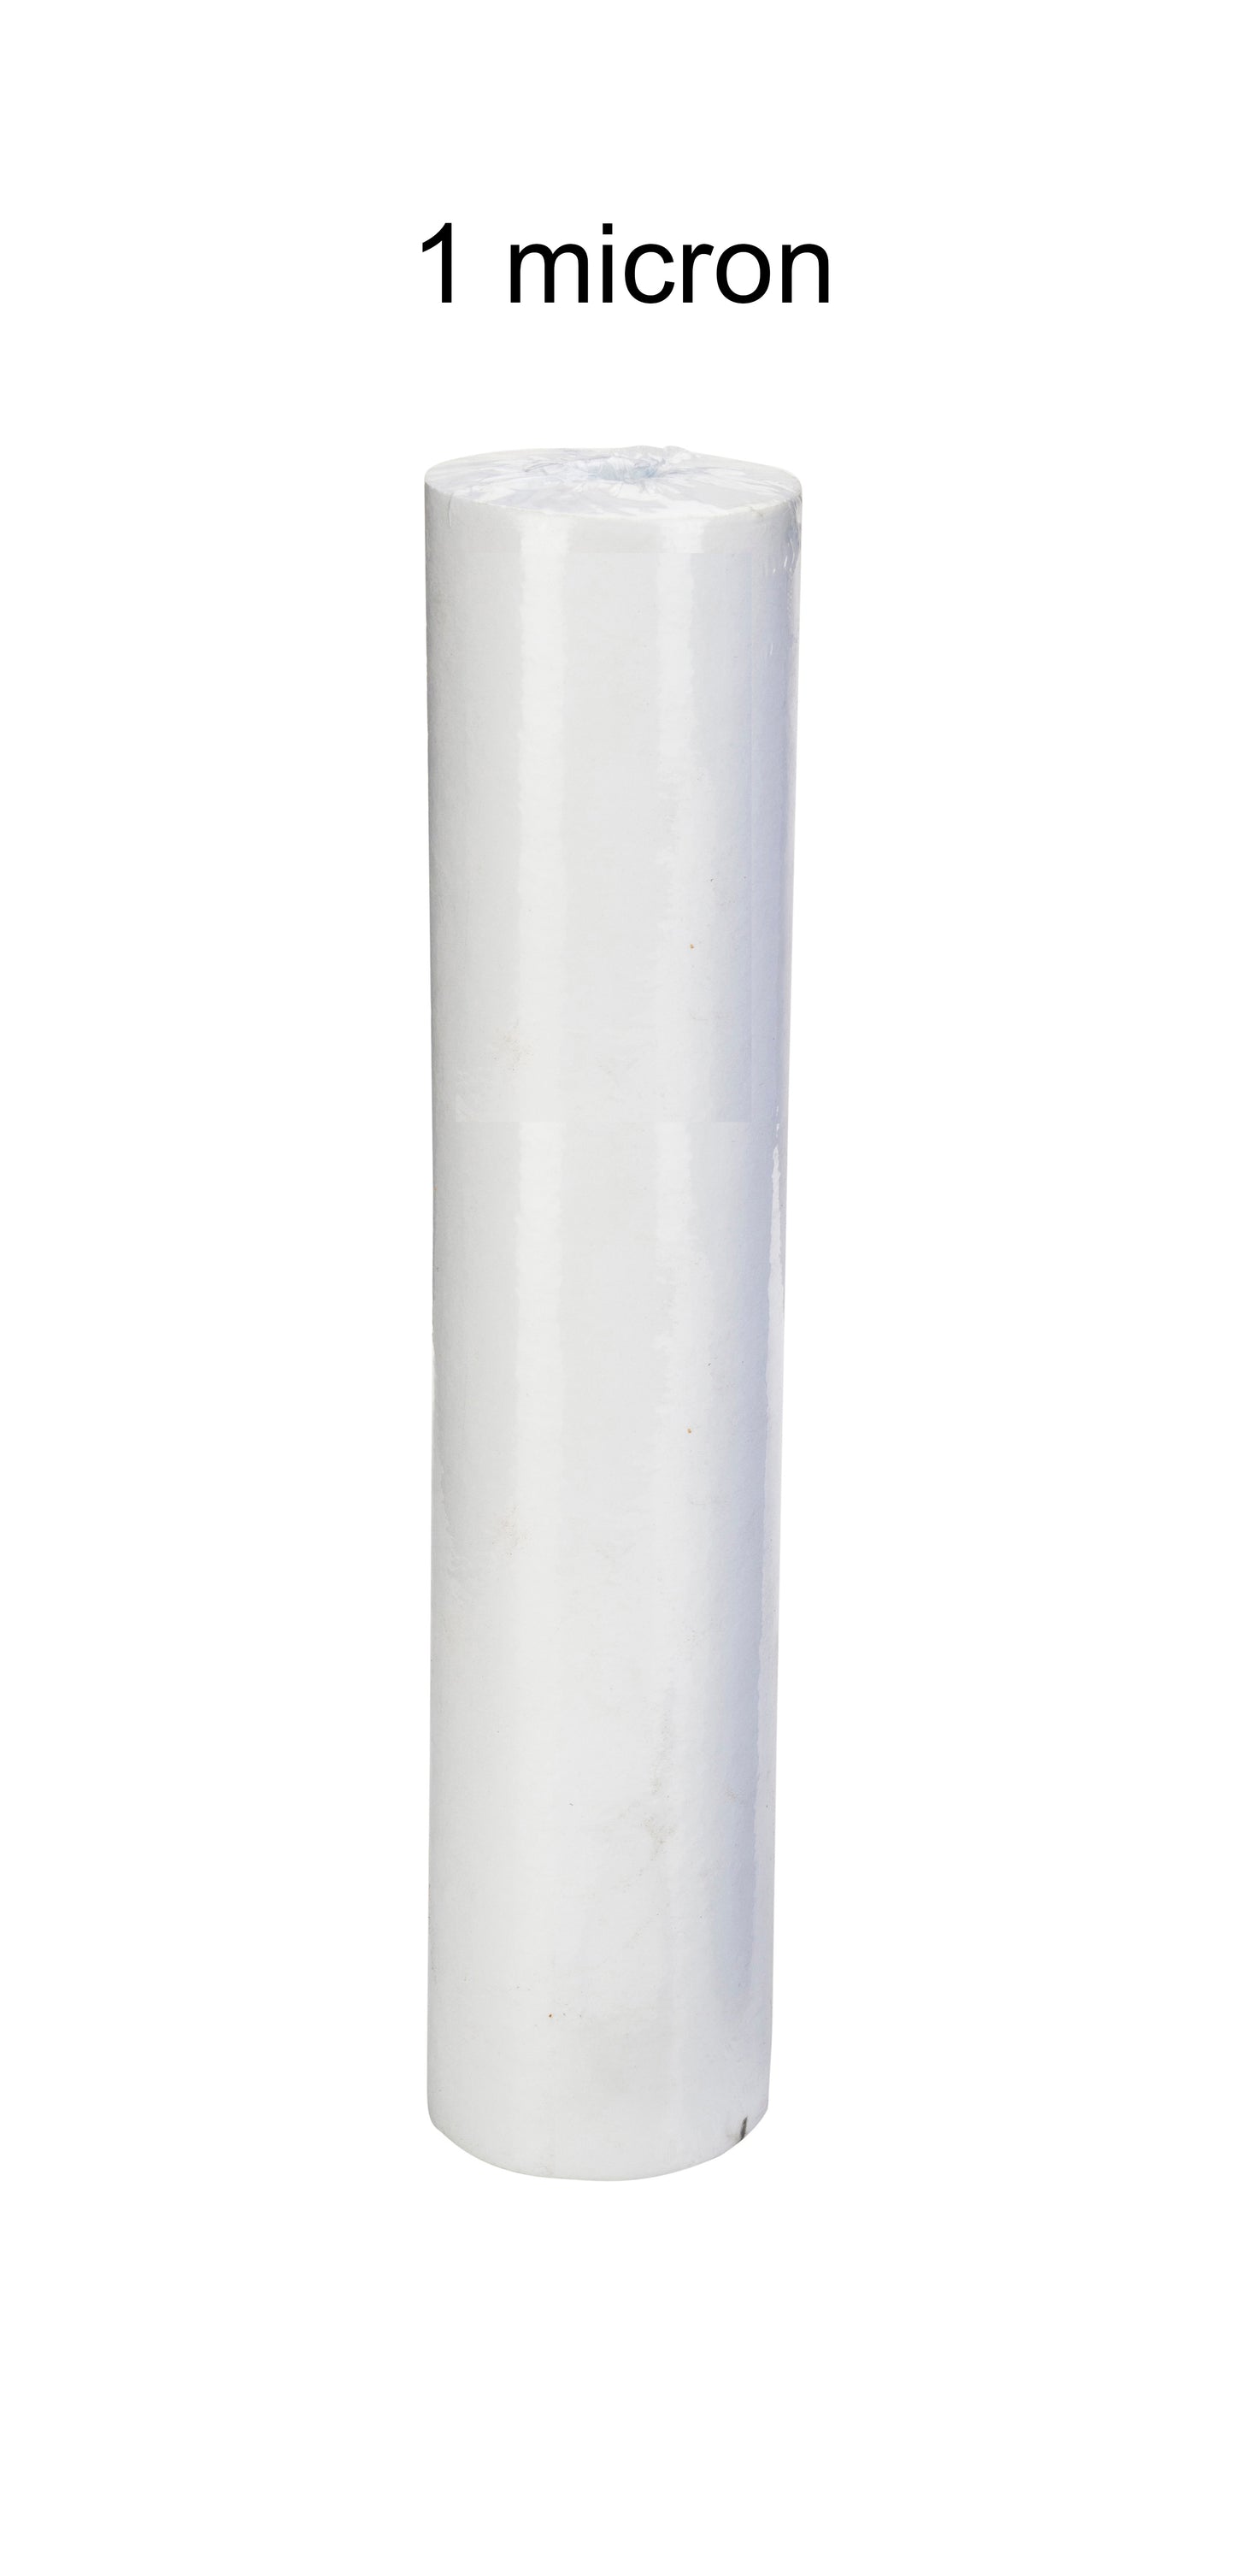 SPC-20 Spun Cartridge replaement filter for mainline sediment filter |Removes impurities Above 1 Micron (20 inch)